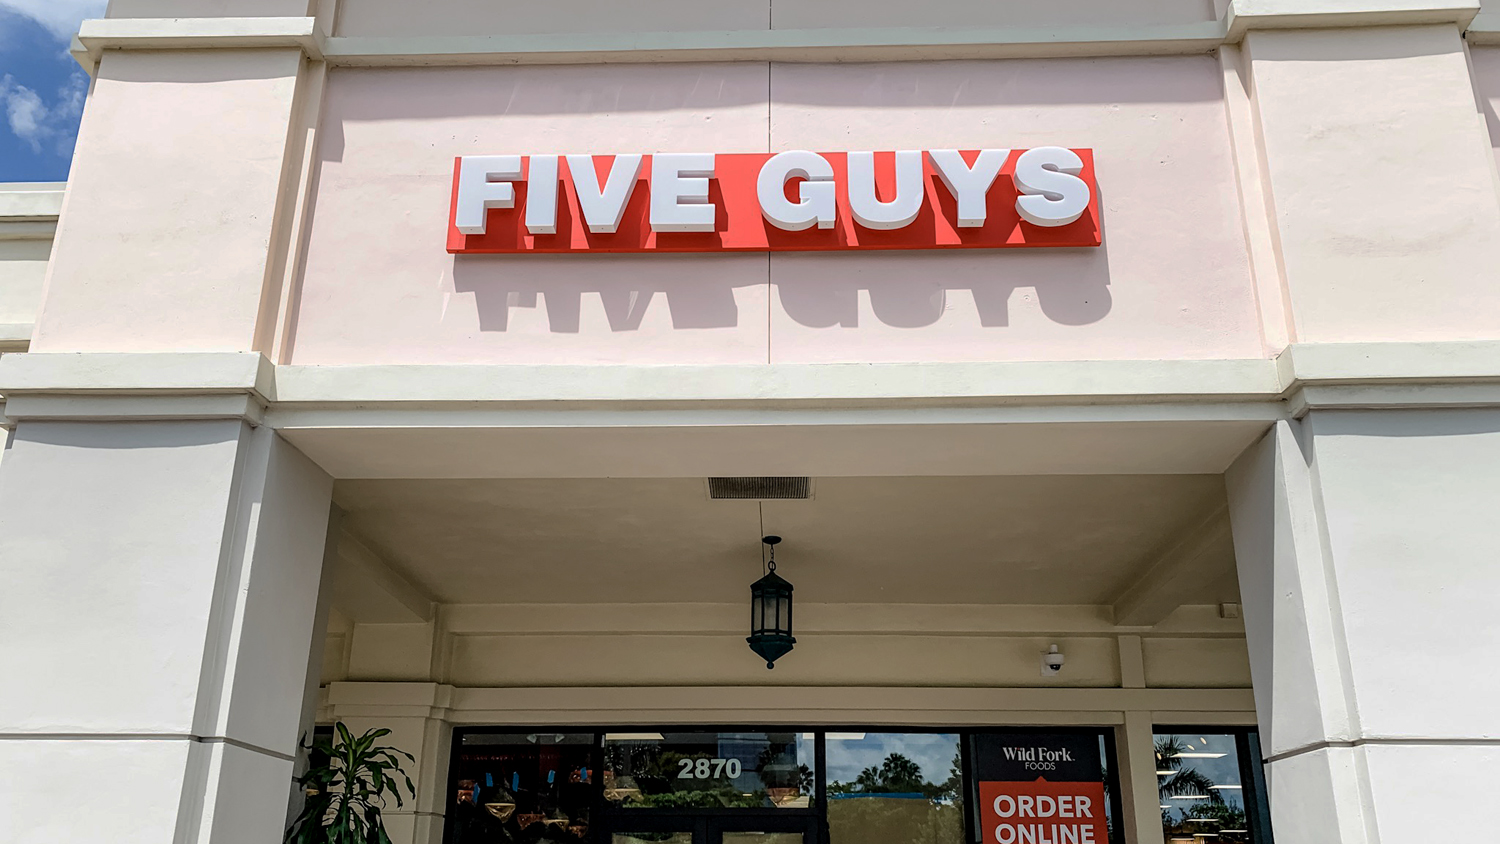 There's Only a Short Wait Until Five Guys Opening Date